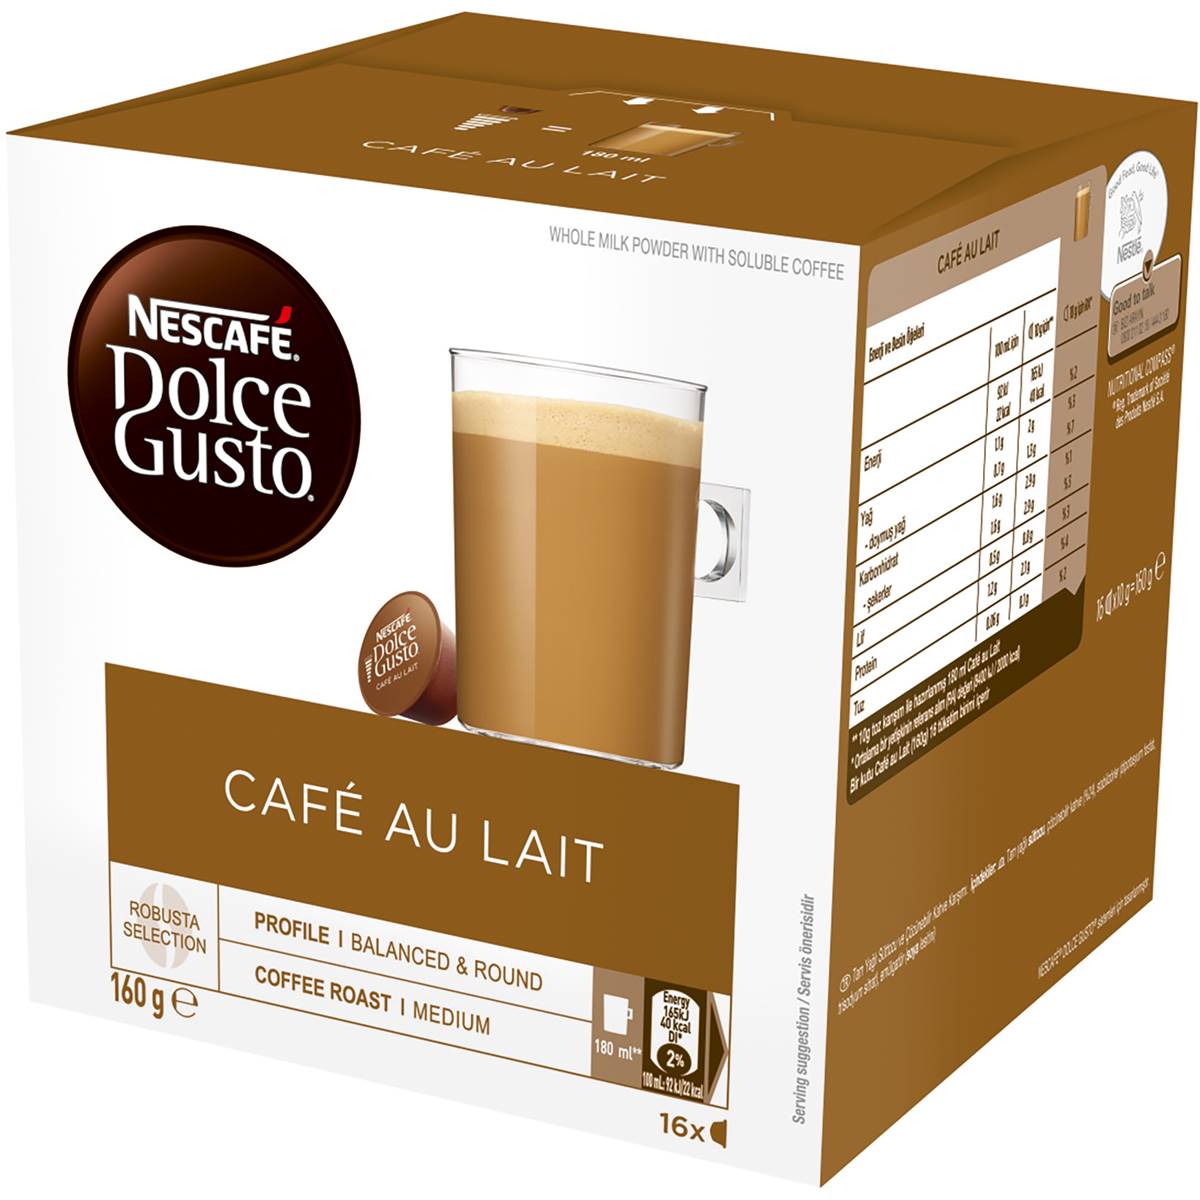 Nescafe Dolce Gusto Coffee Capsules Cafe Au Lait